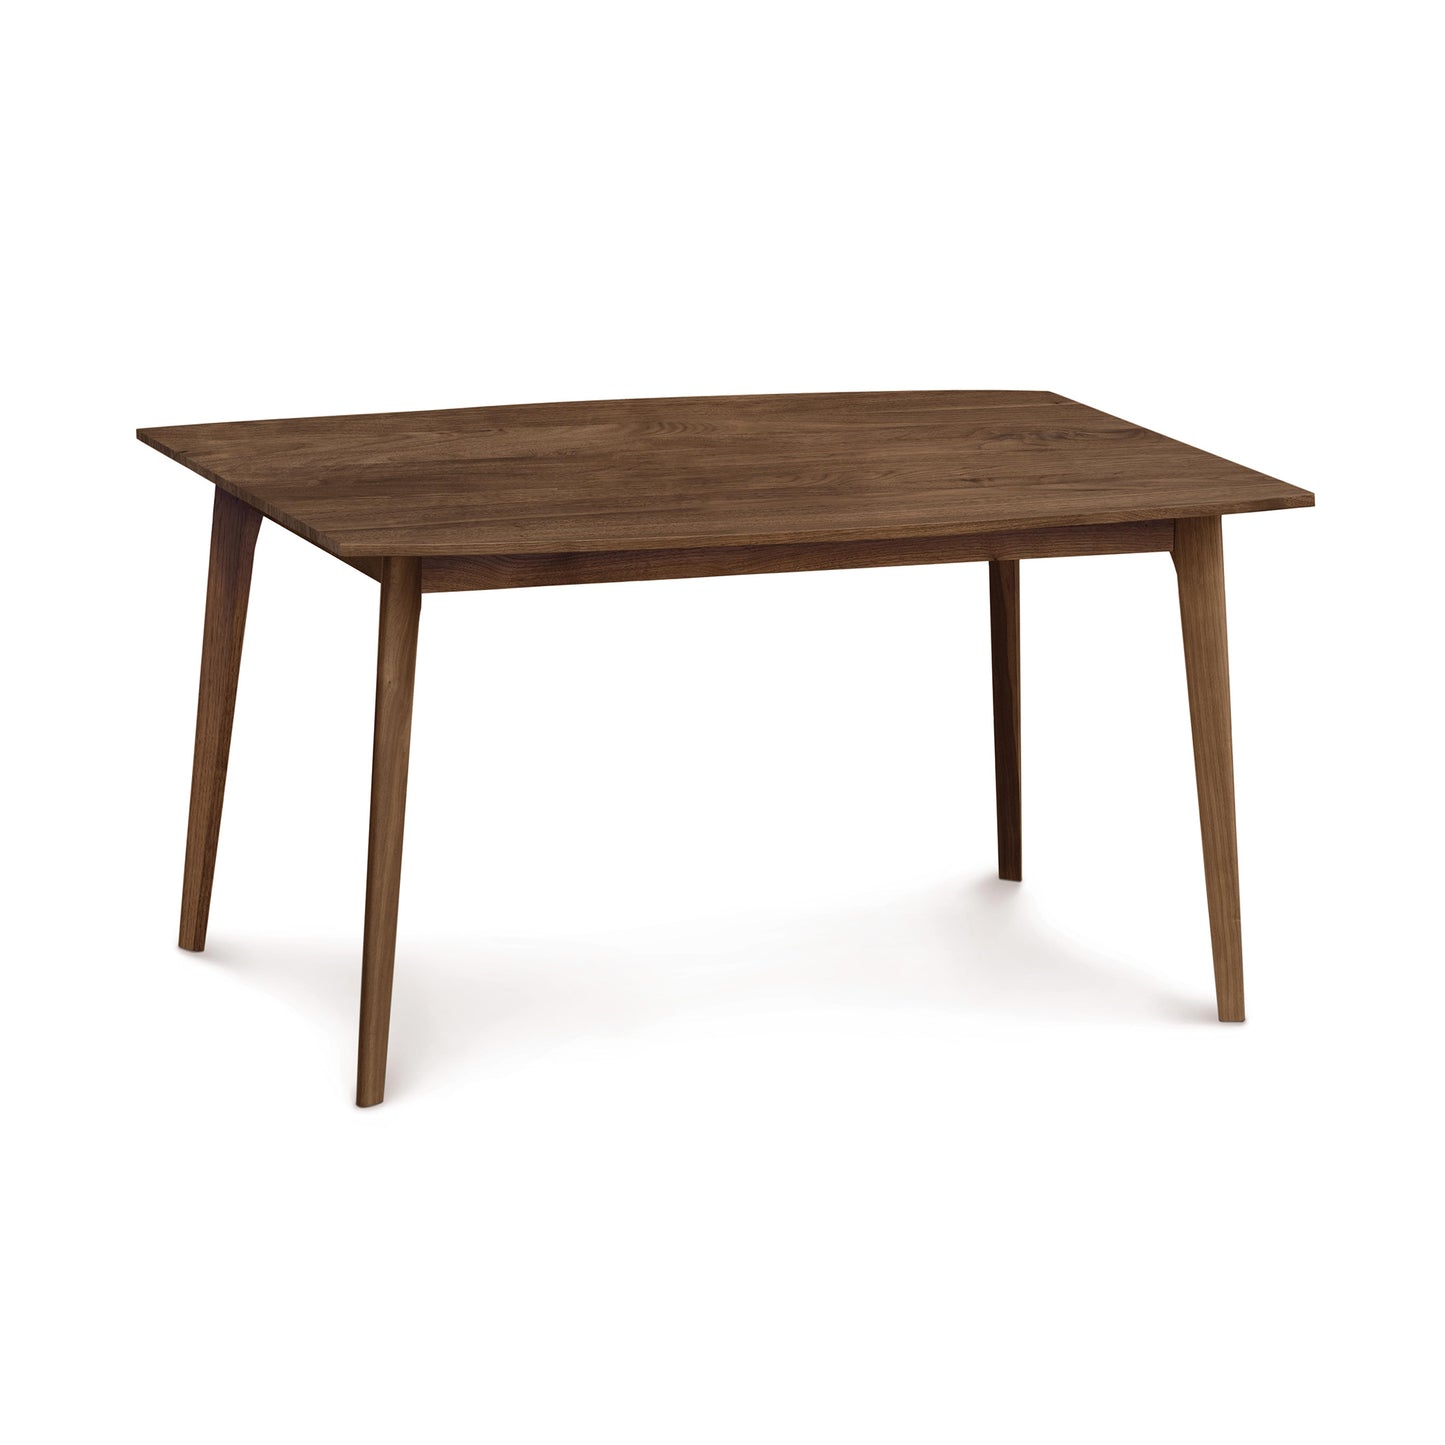 A Catalina Solid-Top Table from Copeland Furniture, made with sustainably-sourced hardwoods and featuring four legs, isolated on a white background.